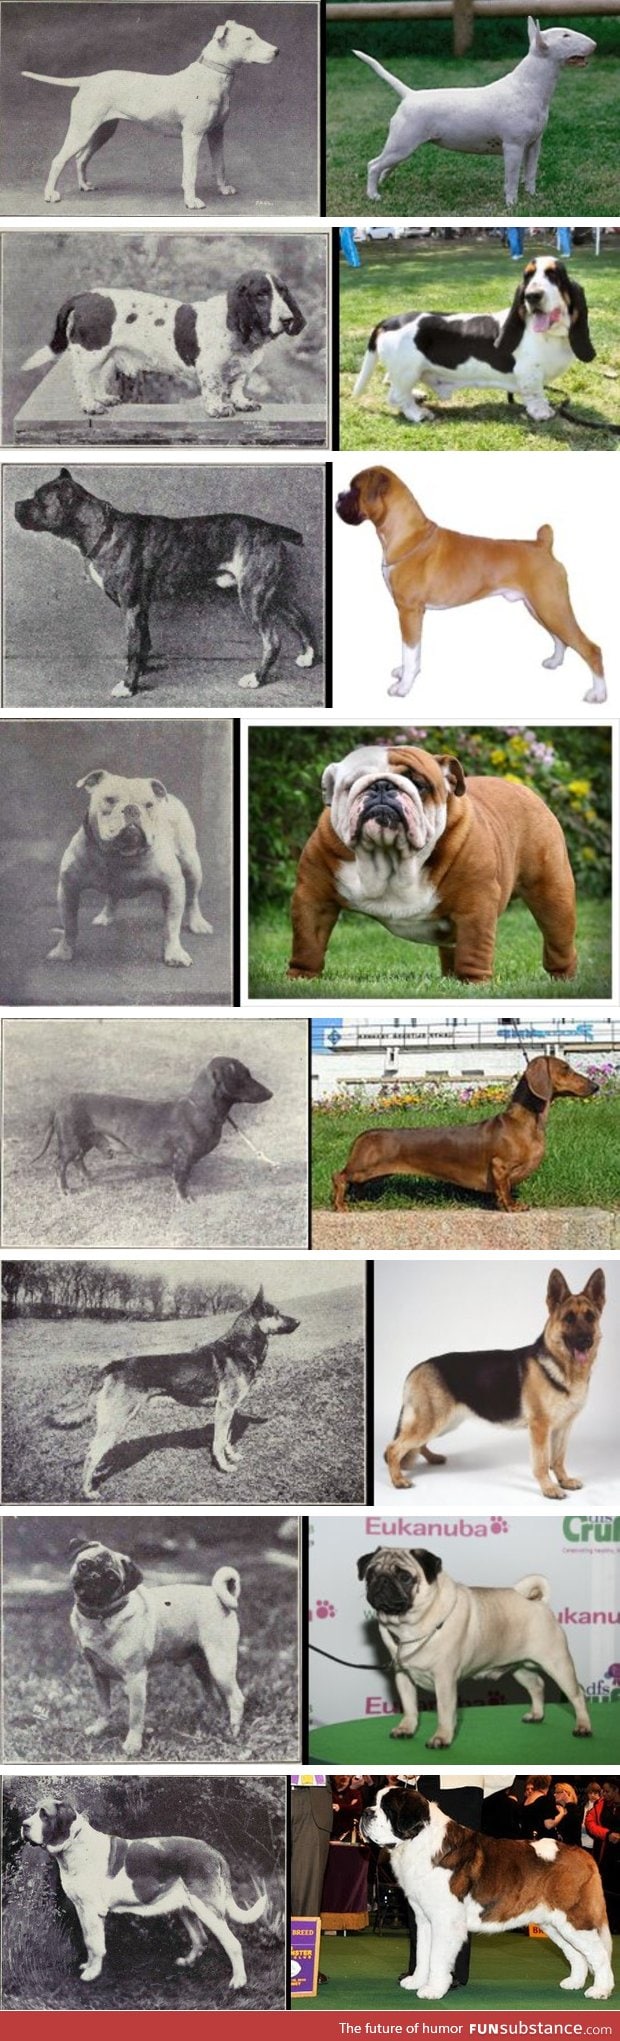 100 years of dog breed "improvement"